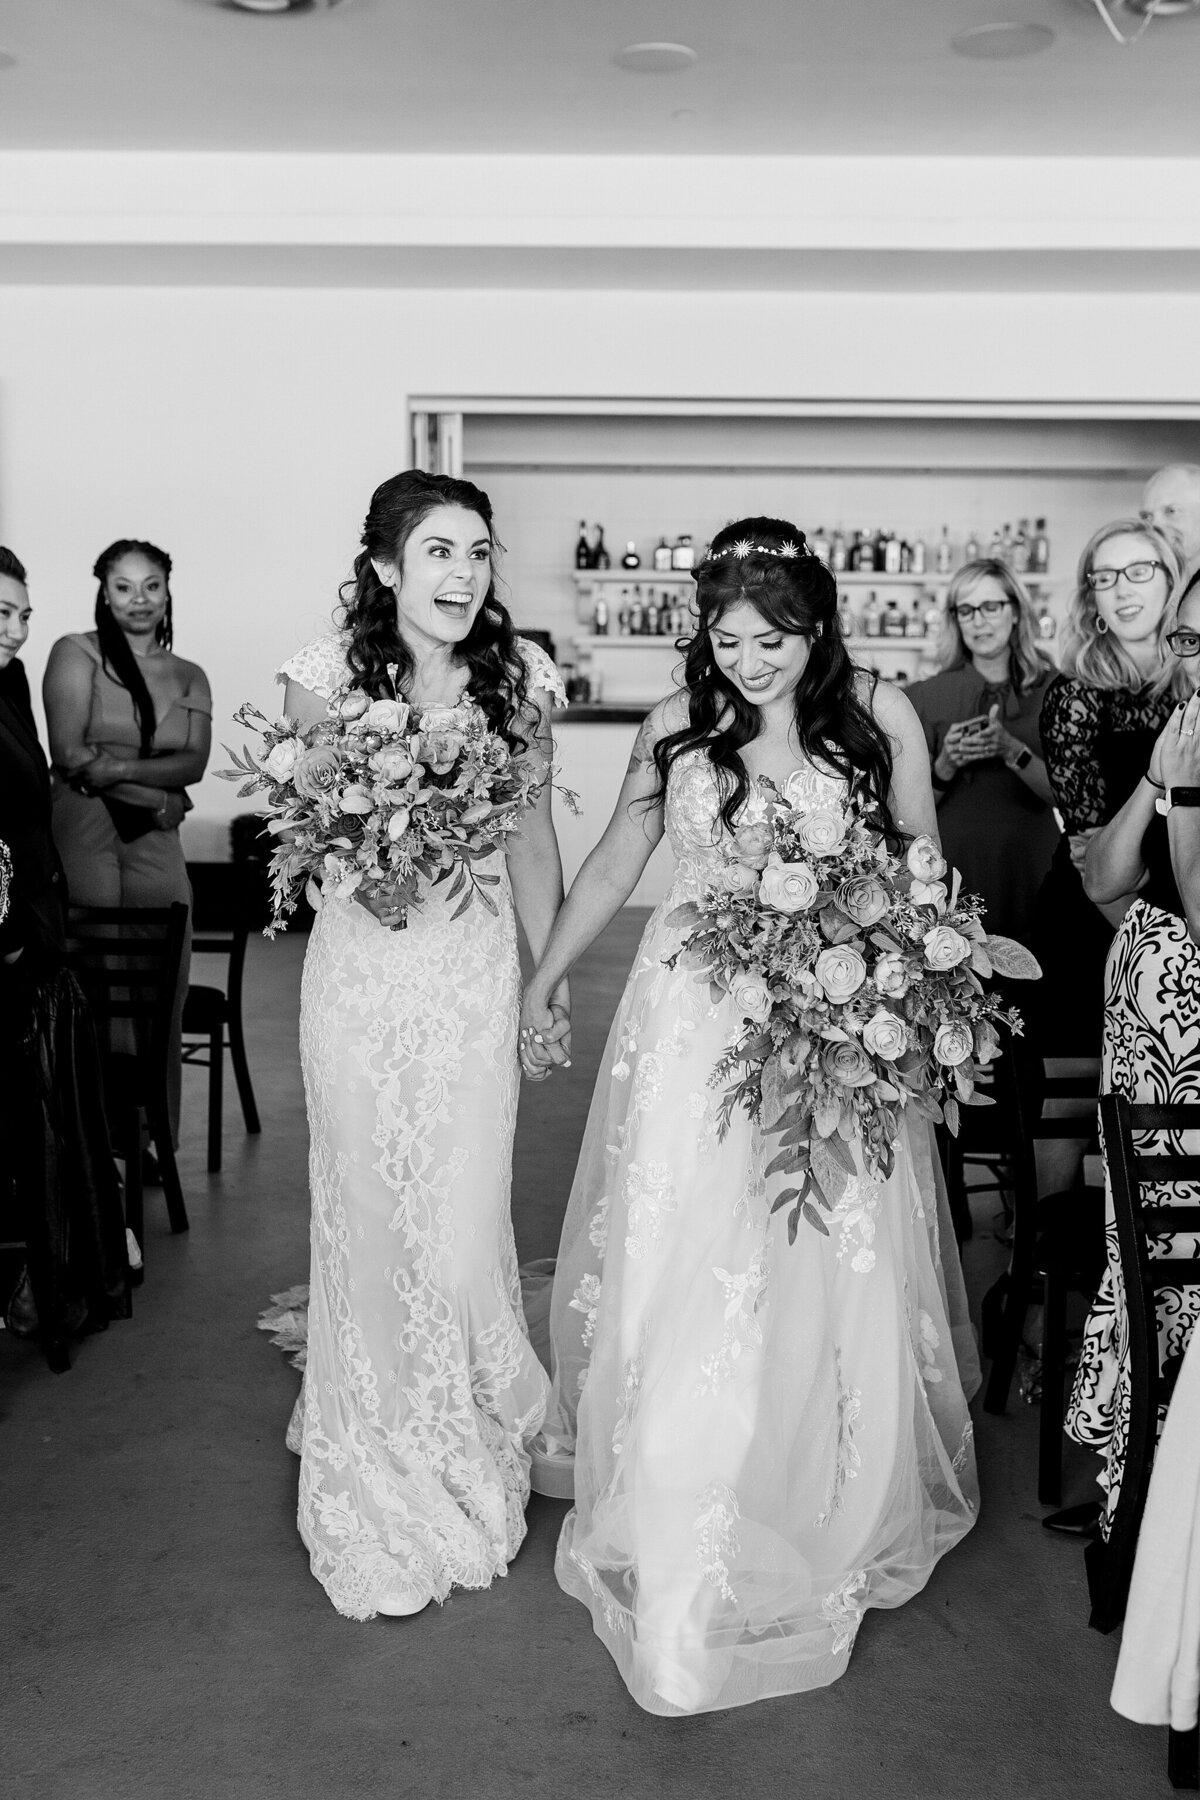 A candid photo of a lesbian couple walking down the aisle of their wedding ceremony at a wedding in Dallas, Texas. The bride on the left is heartily laughing, wearing a short sleeve intricate dress, and holding a bouquet. The bride on the right is looking down, smiling, is wearing a sleeveless intricate dress, and is holding a bouquet. Wedding guests can be seen watching on joyfully on either side of them.